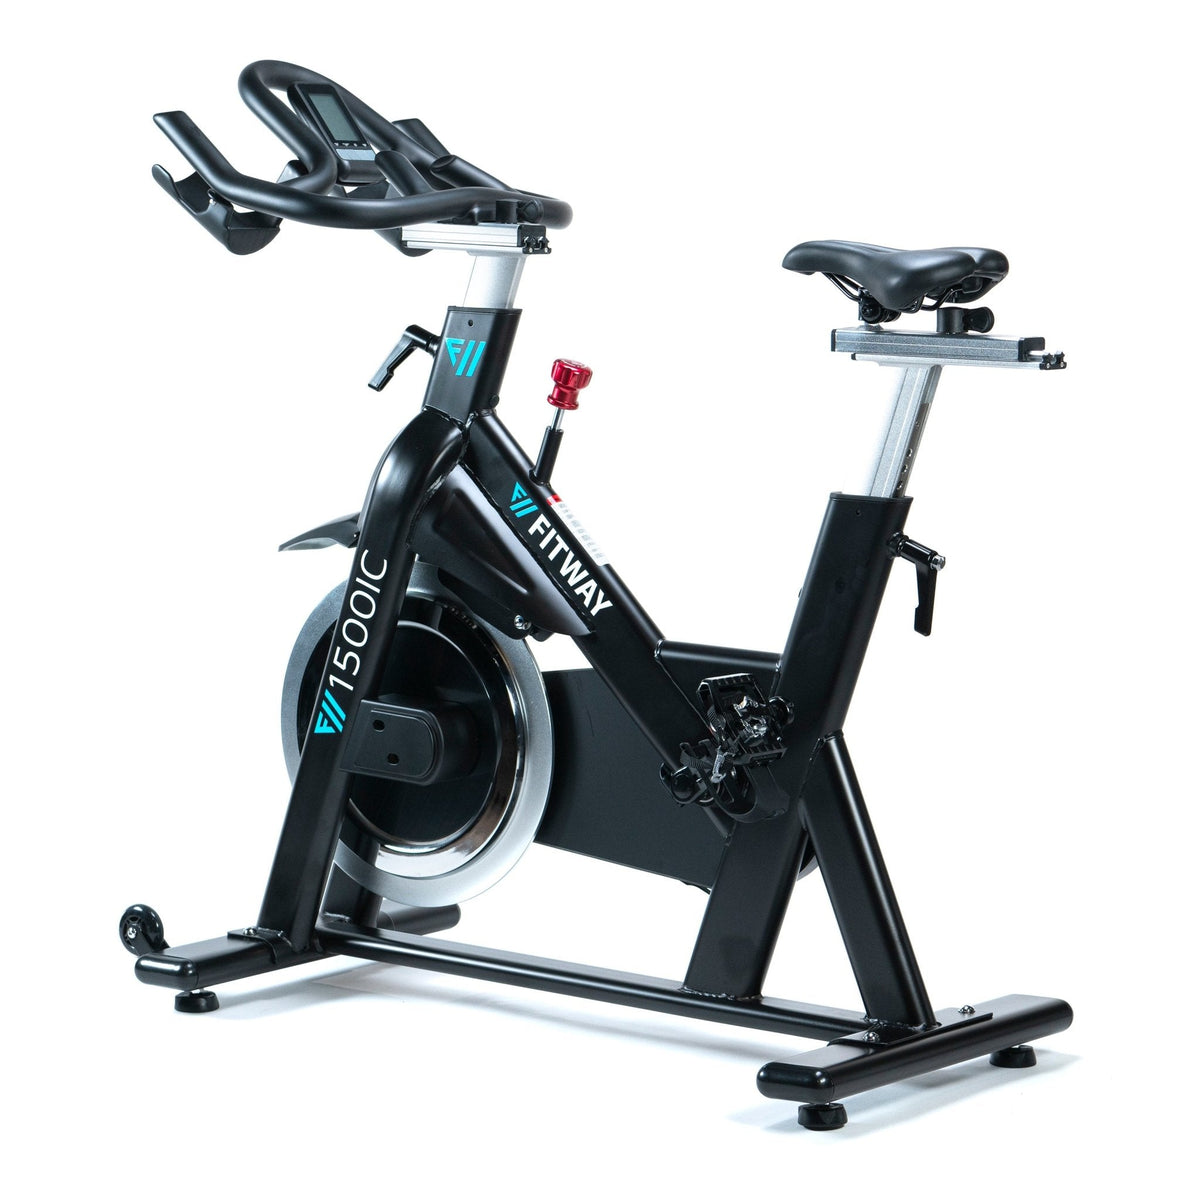 FitWay Equip. 1500IC Indoor Cycle - Angle 3